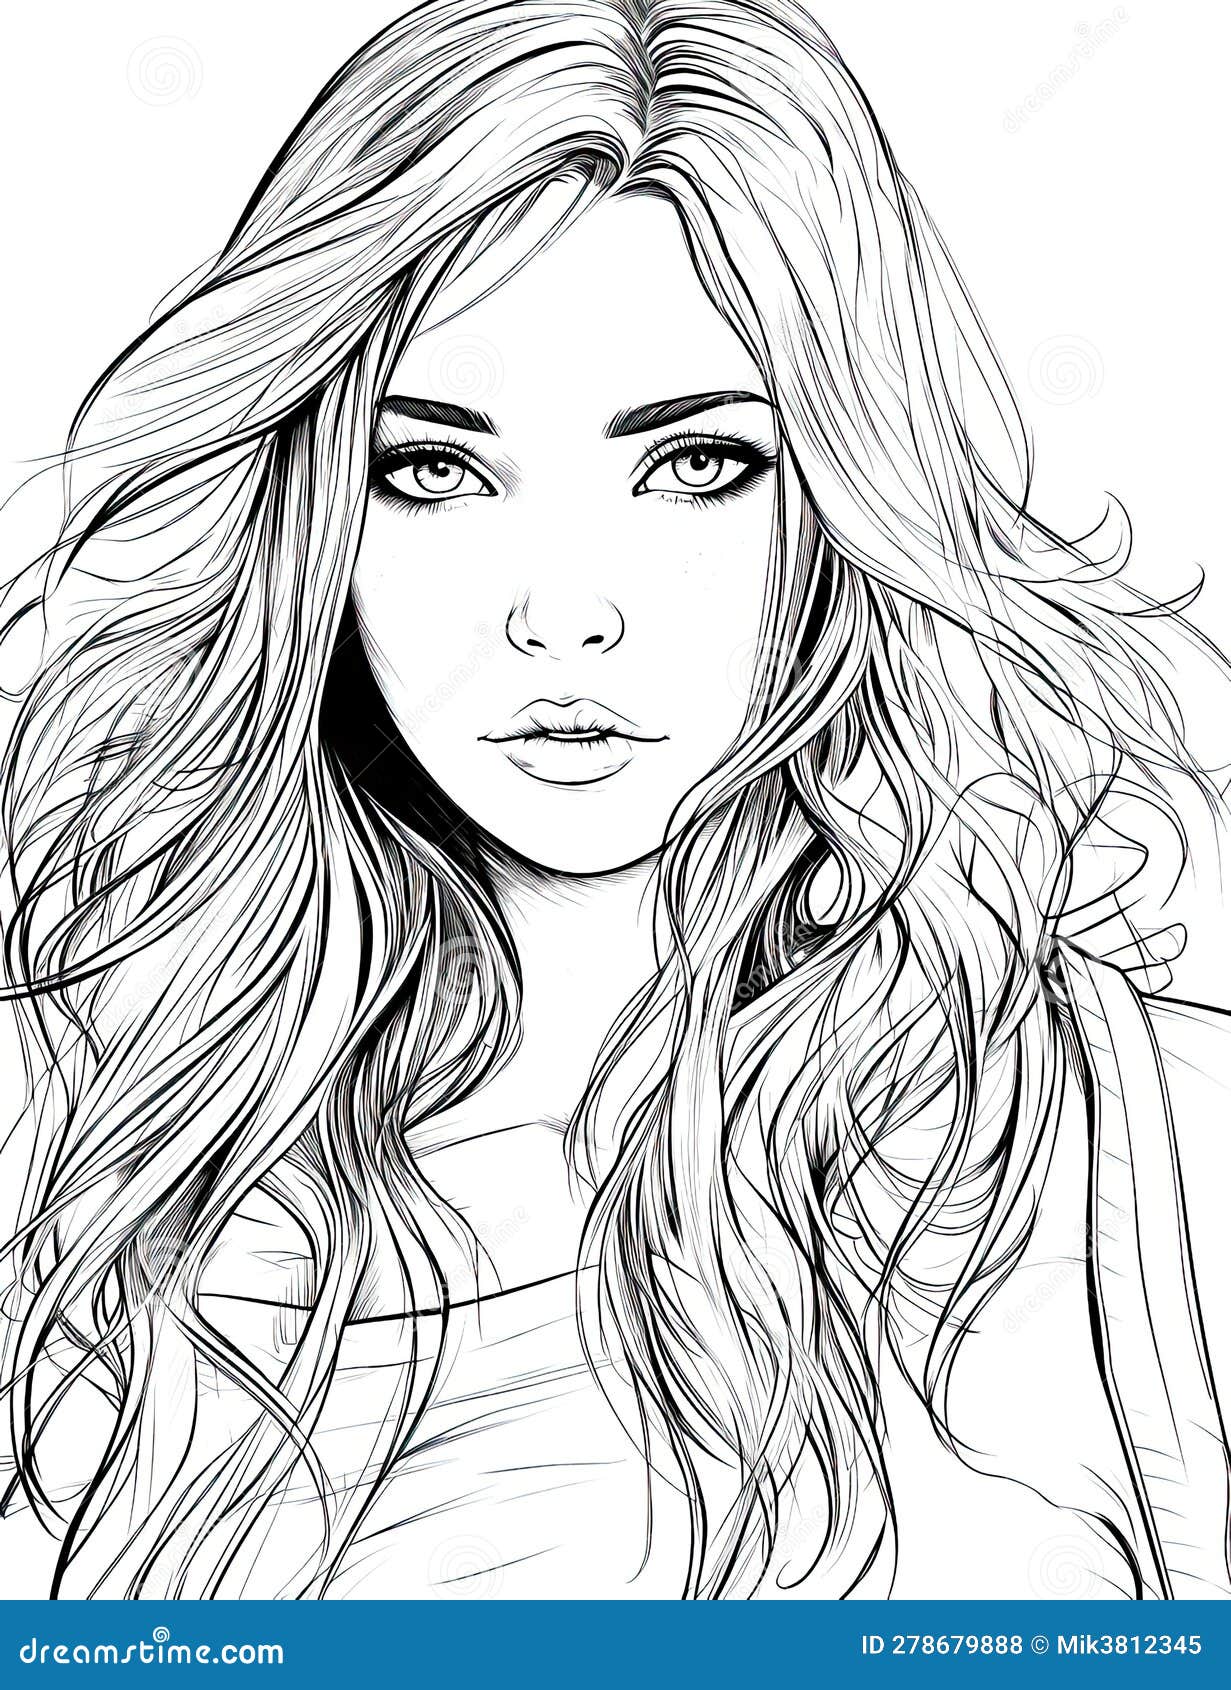 Girls portraits for coloring book stock illustration